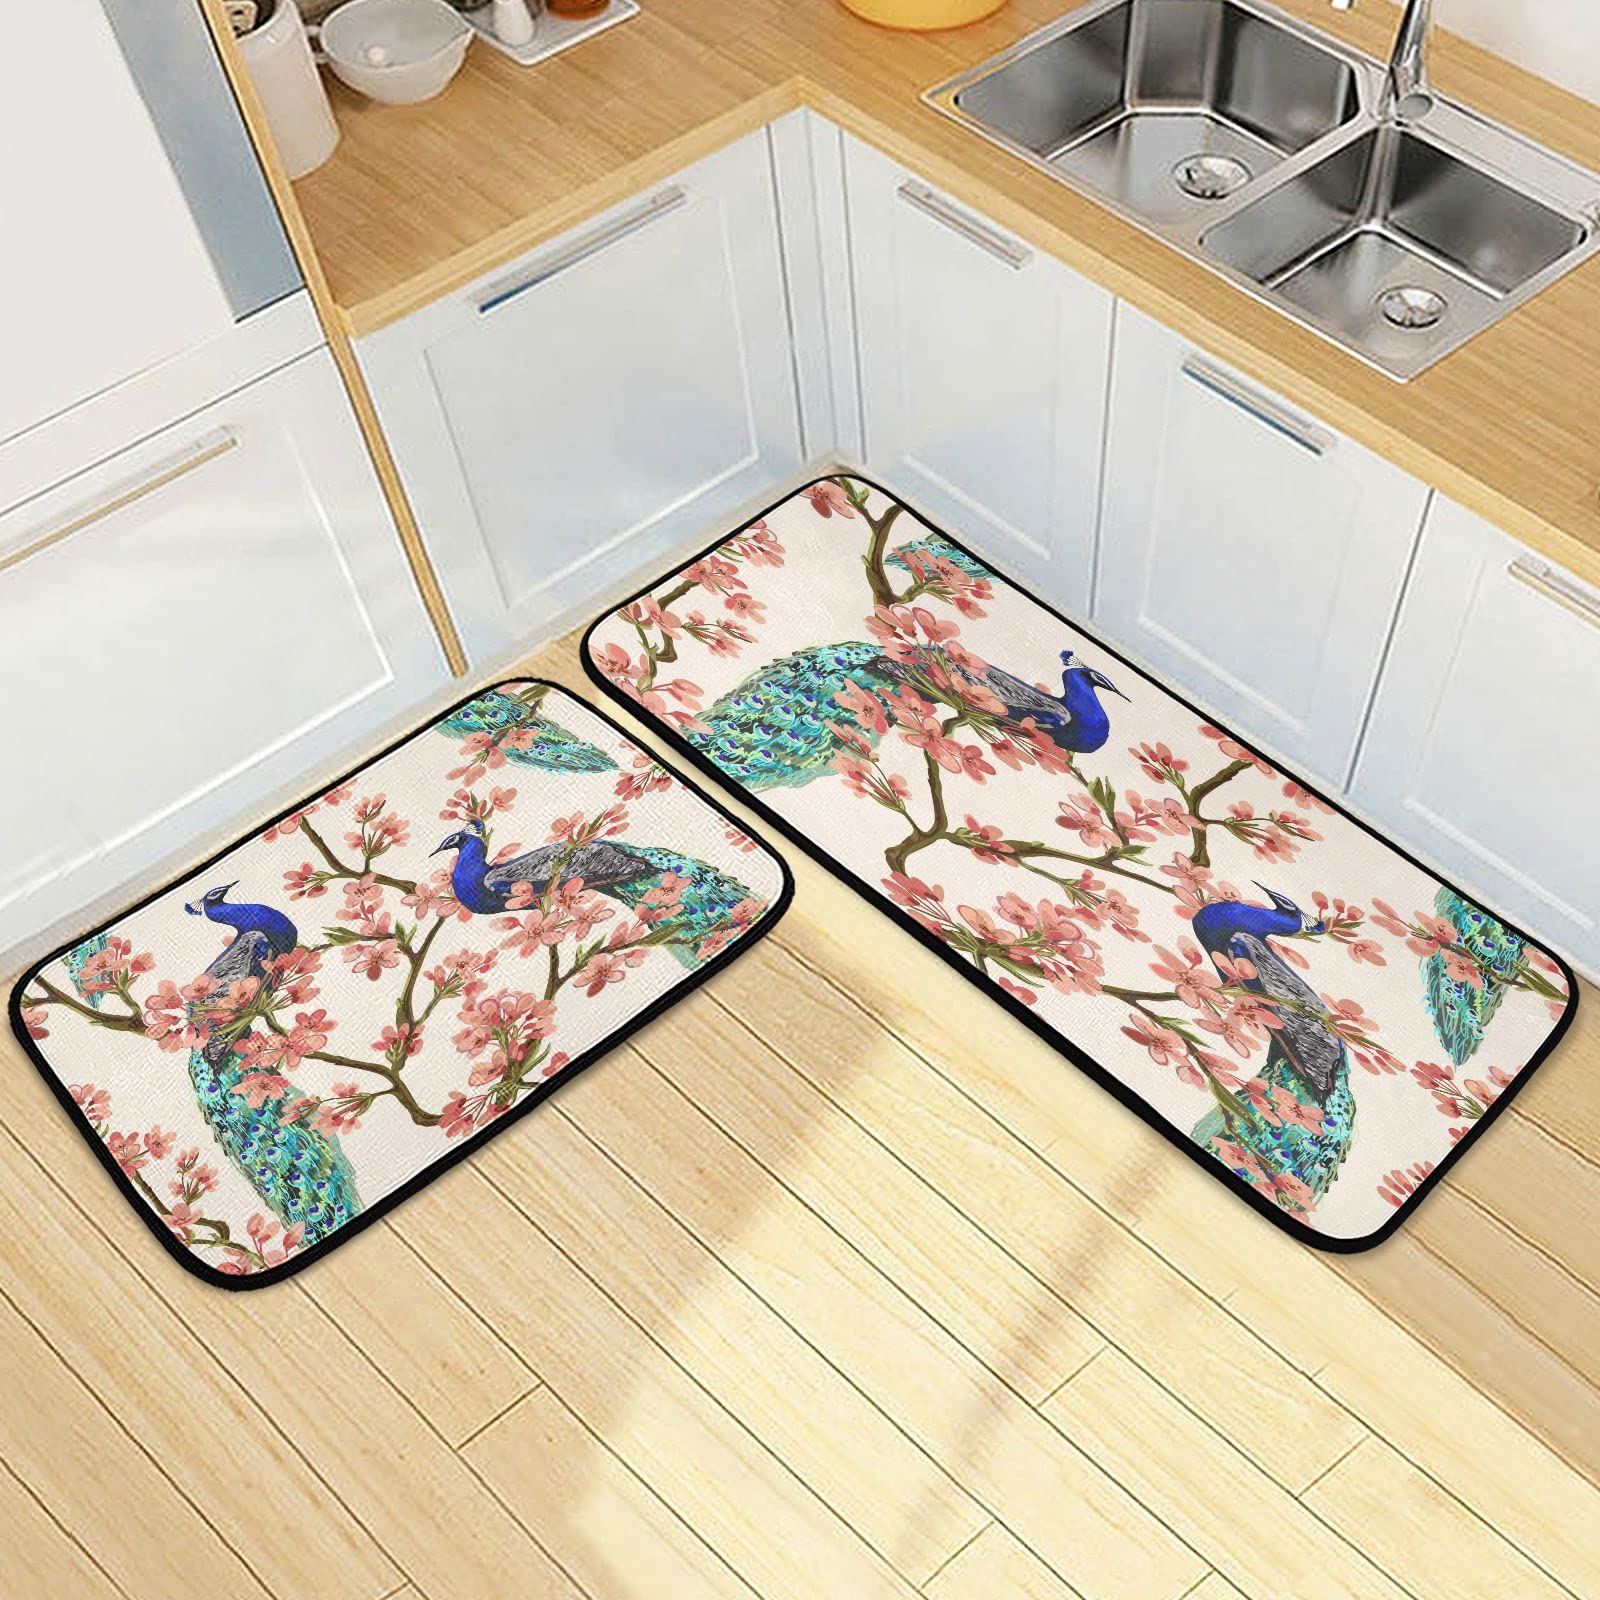 Peacock Flower Tree Kitchen Mat Set 2PCS, Super Absorbent Kitchen Rugs and Mats Non Slip Easy Clean Carpets Rugs for Kitchen Floor Sink Laundry Runner Area Rug Carpet